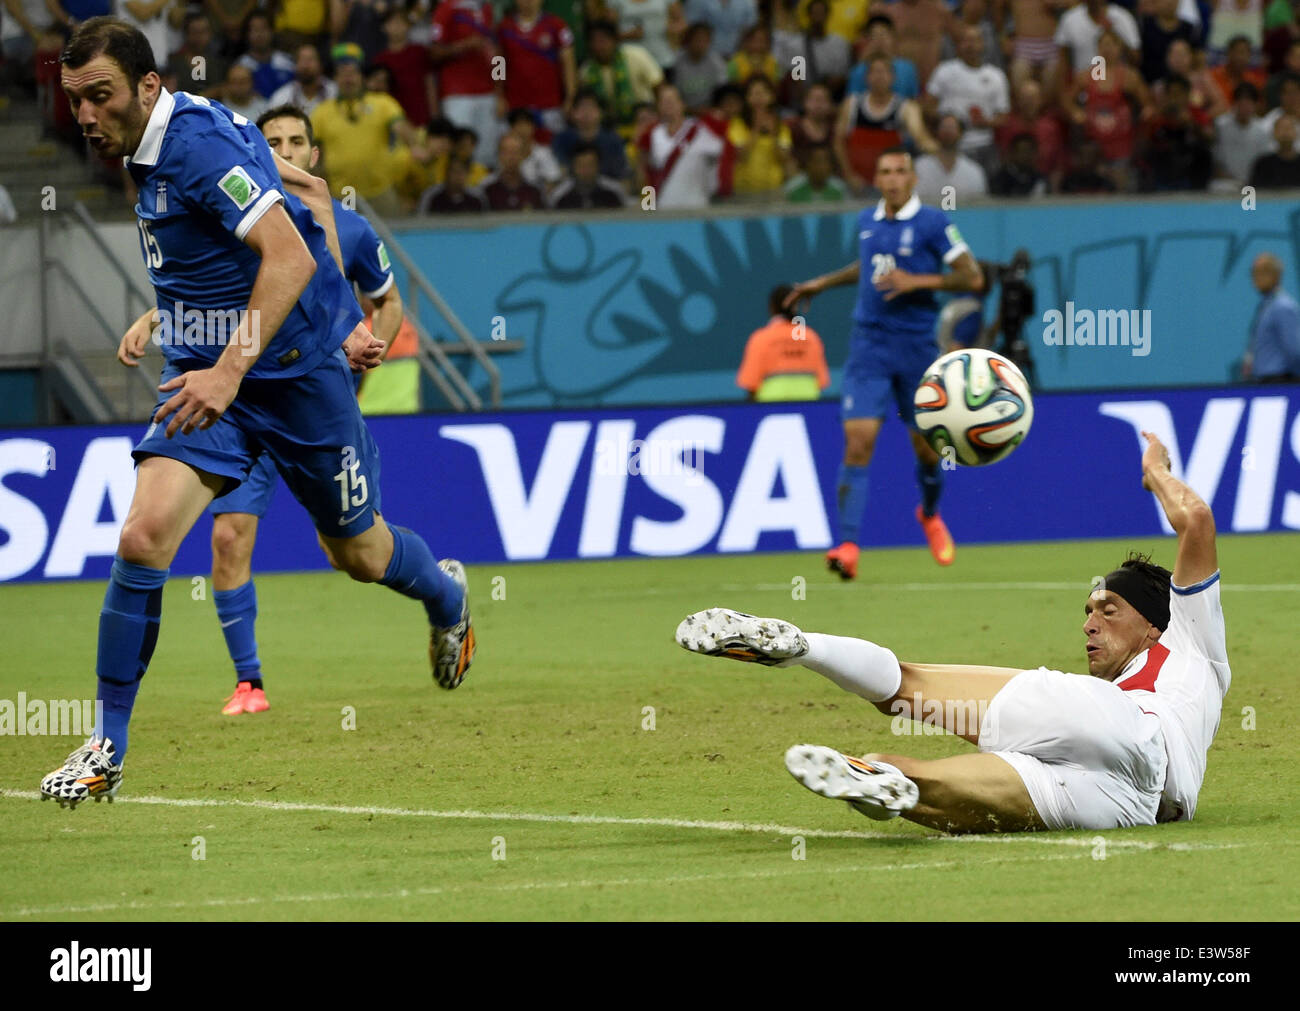 Recife, Brazil. 29th June, 2014. Costa Rica's Christian Bolanos falls down during a Round of 16 match between Costa Rica and Greece of 2014 FIFA World Cup at the Arena Pernambuco Stadium in Recife, Brazil, on June 29, 2014. Credit:  Lui Siu Wai/Xinhua/Alamy Live News Stock Photo